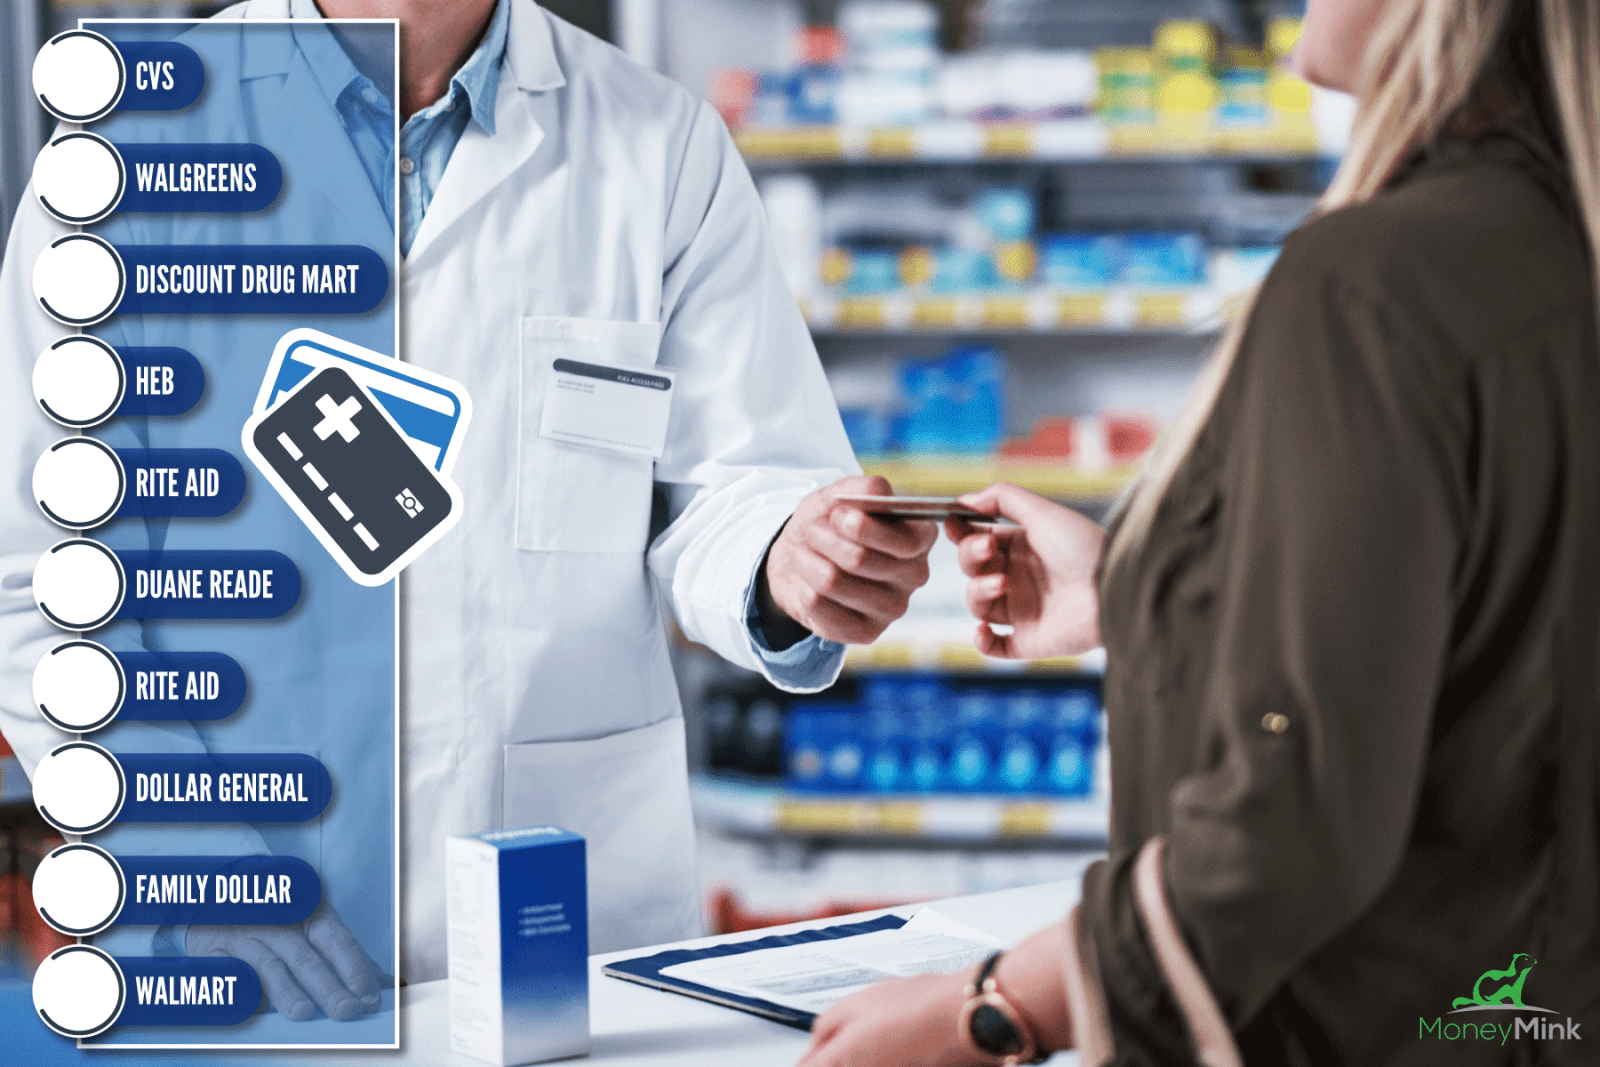 yes we do accept cards here said the pharmacist, What Stores Accept OTC Card?